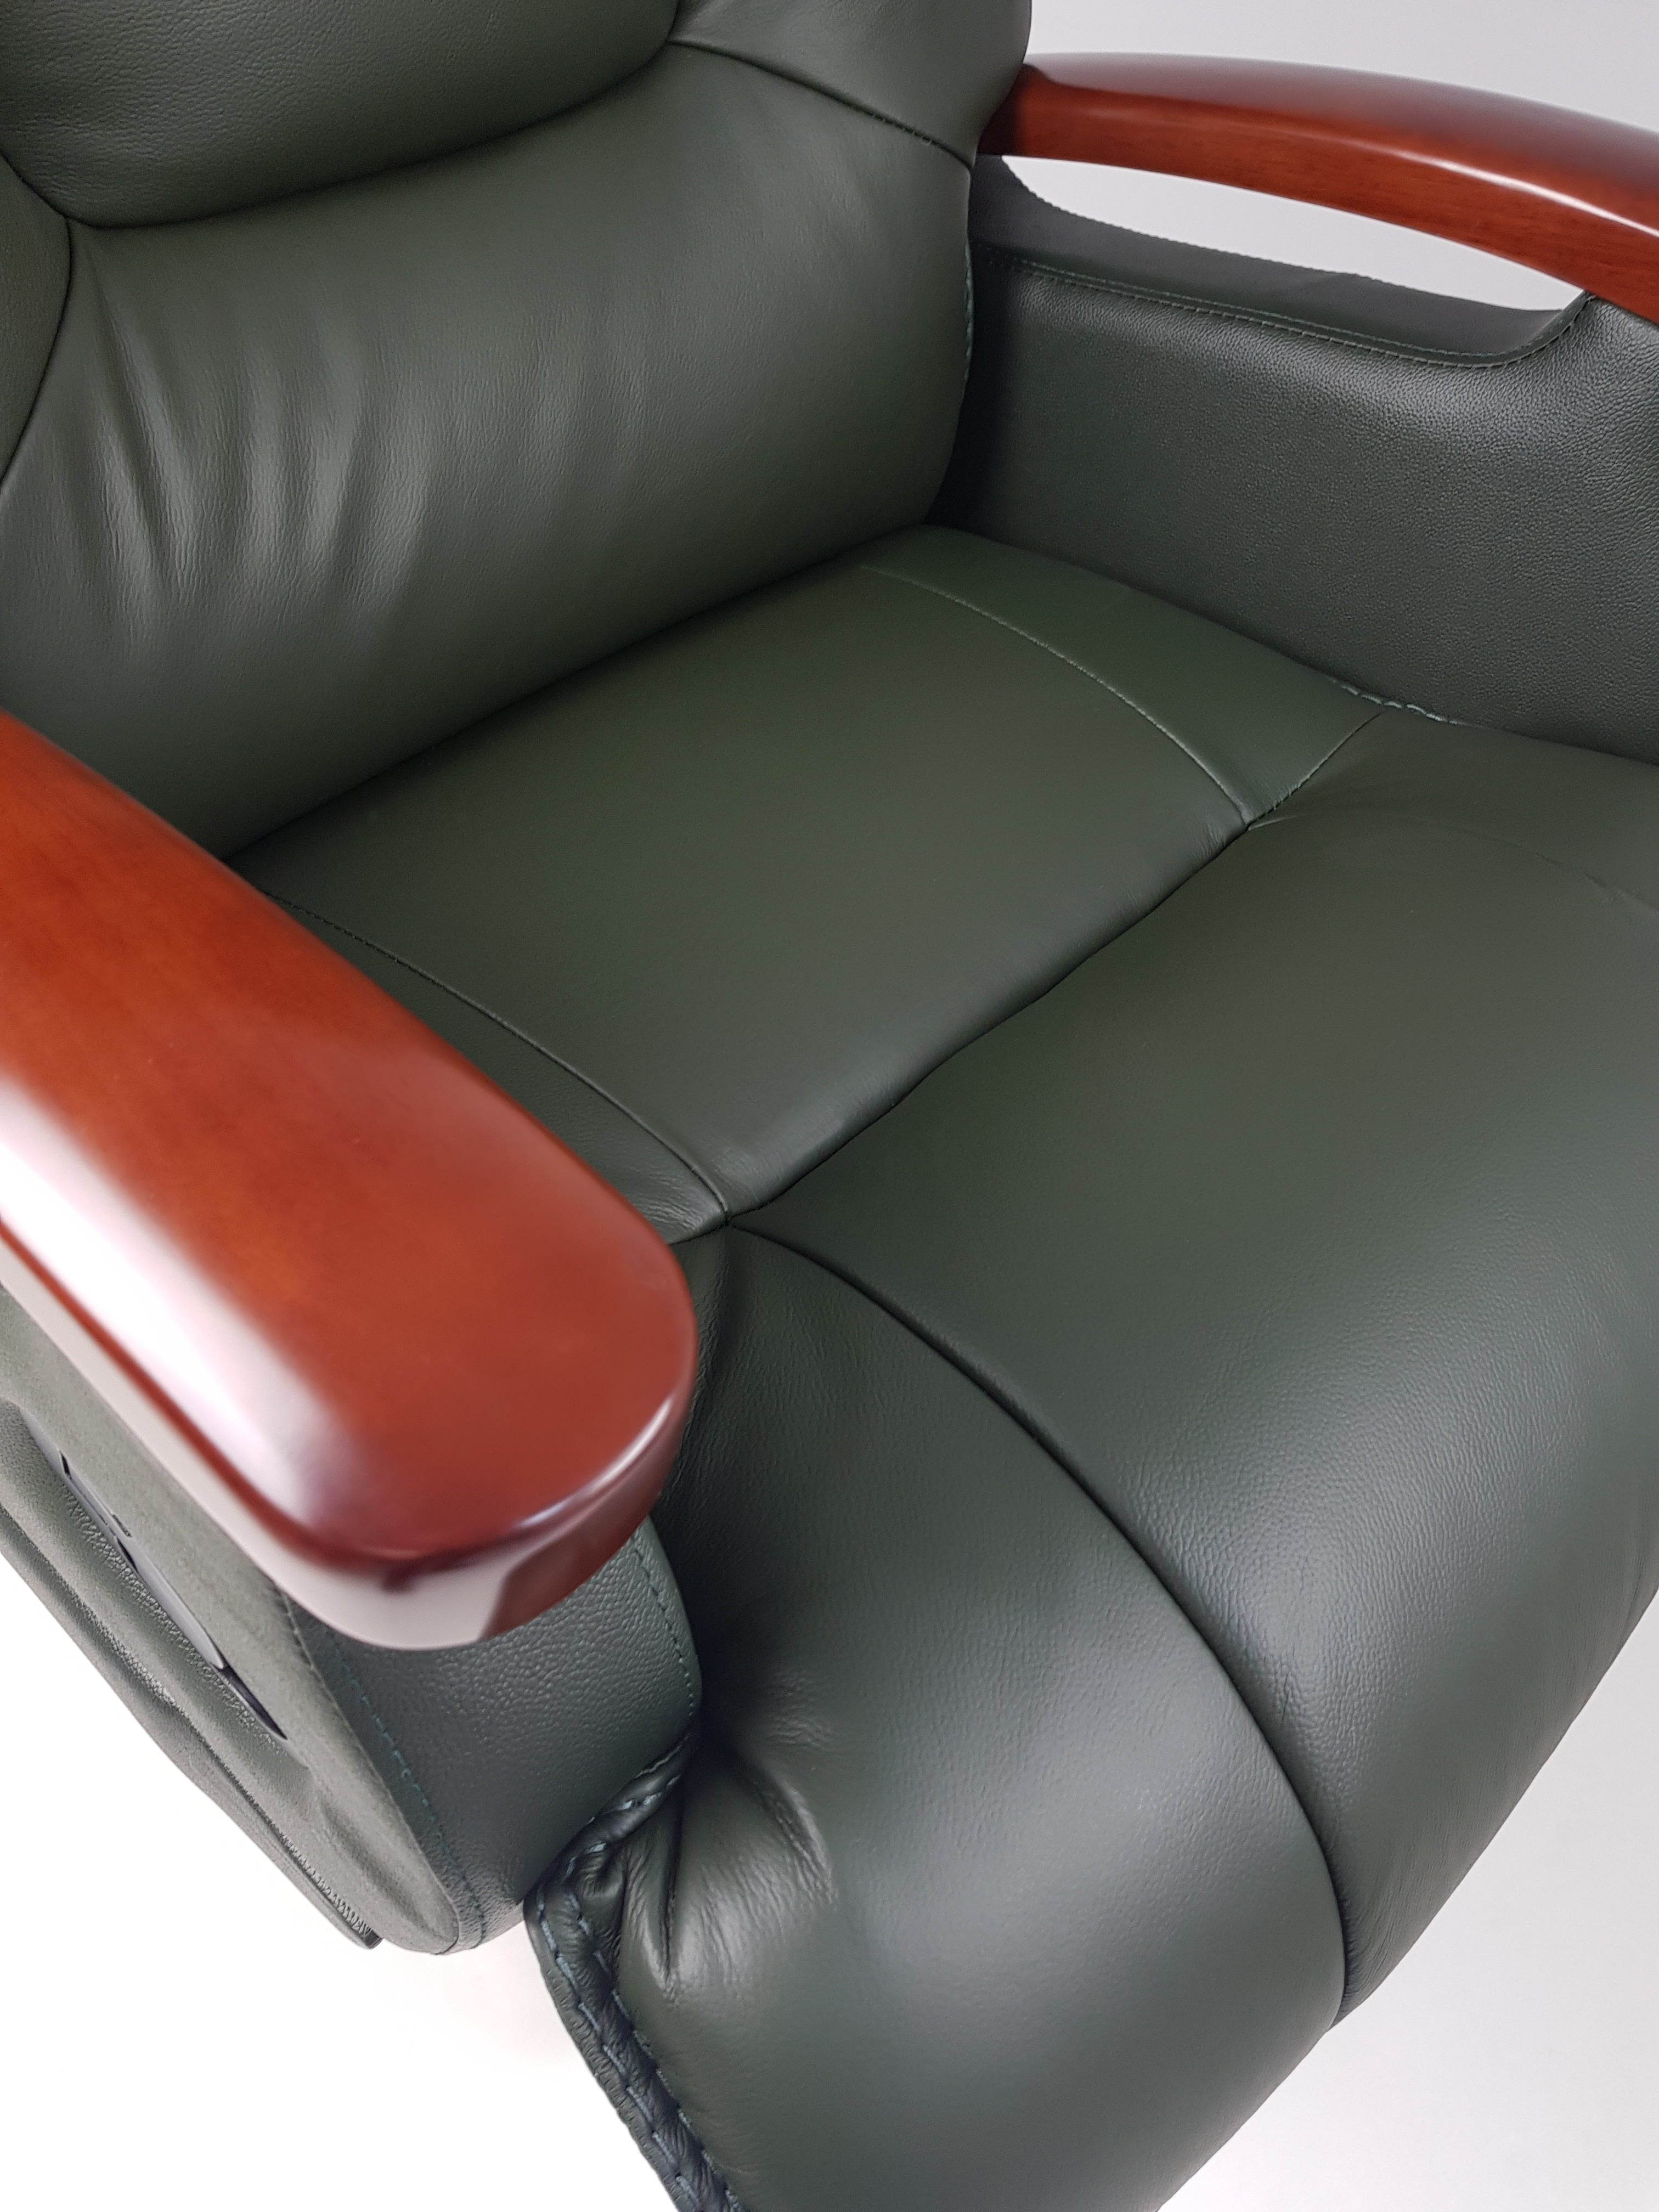 Luxury Green Leather Executive Office Chair - A302